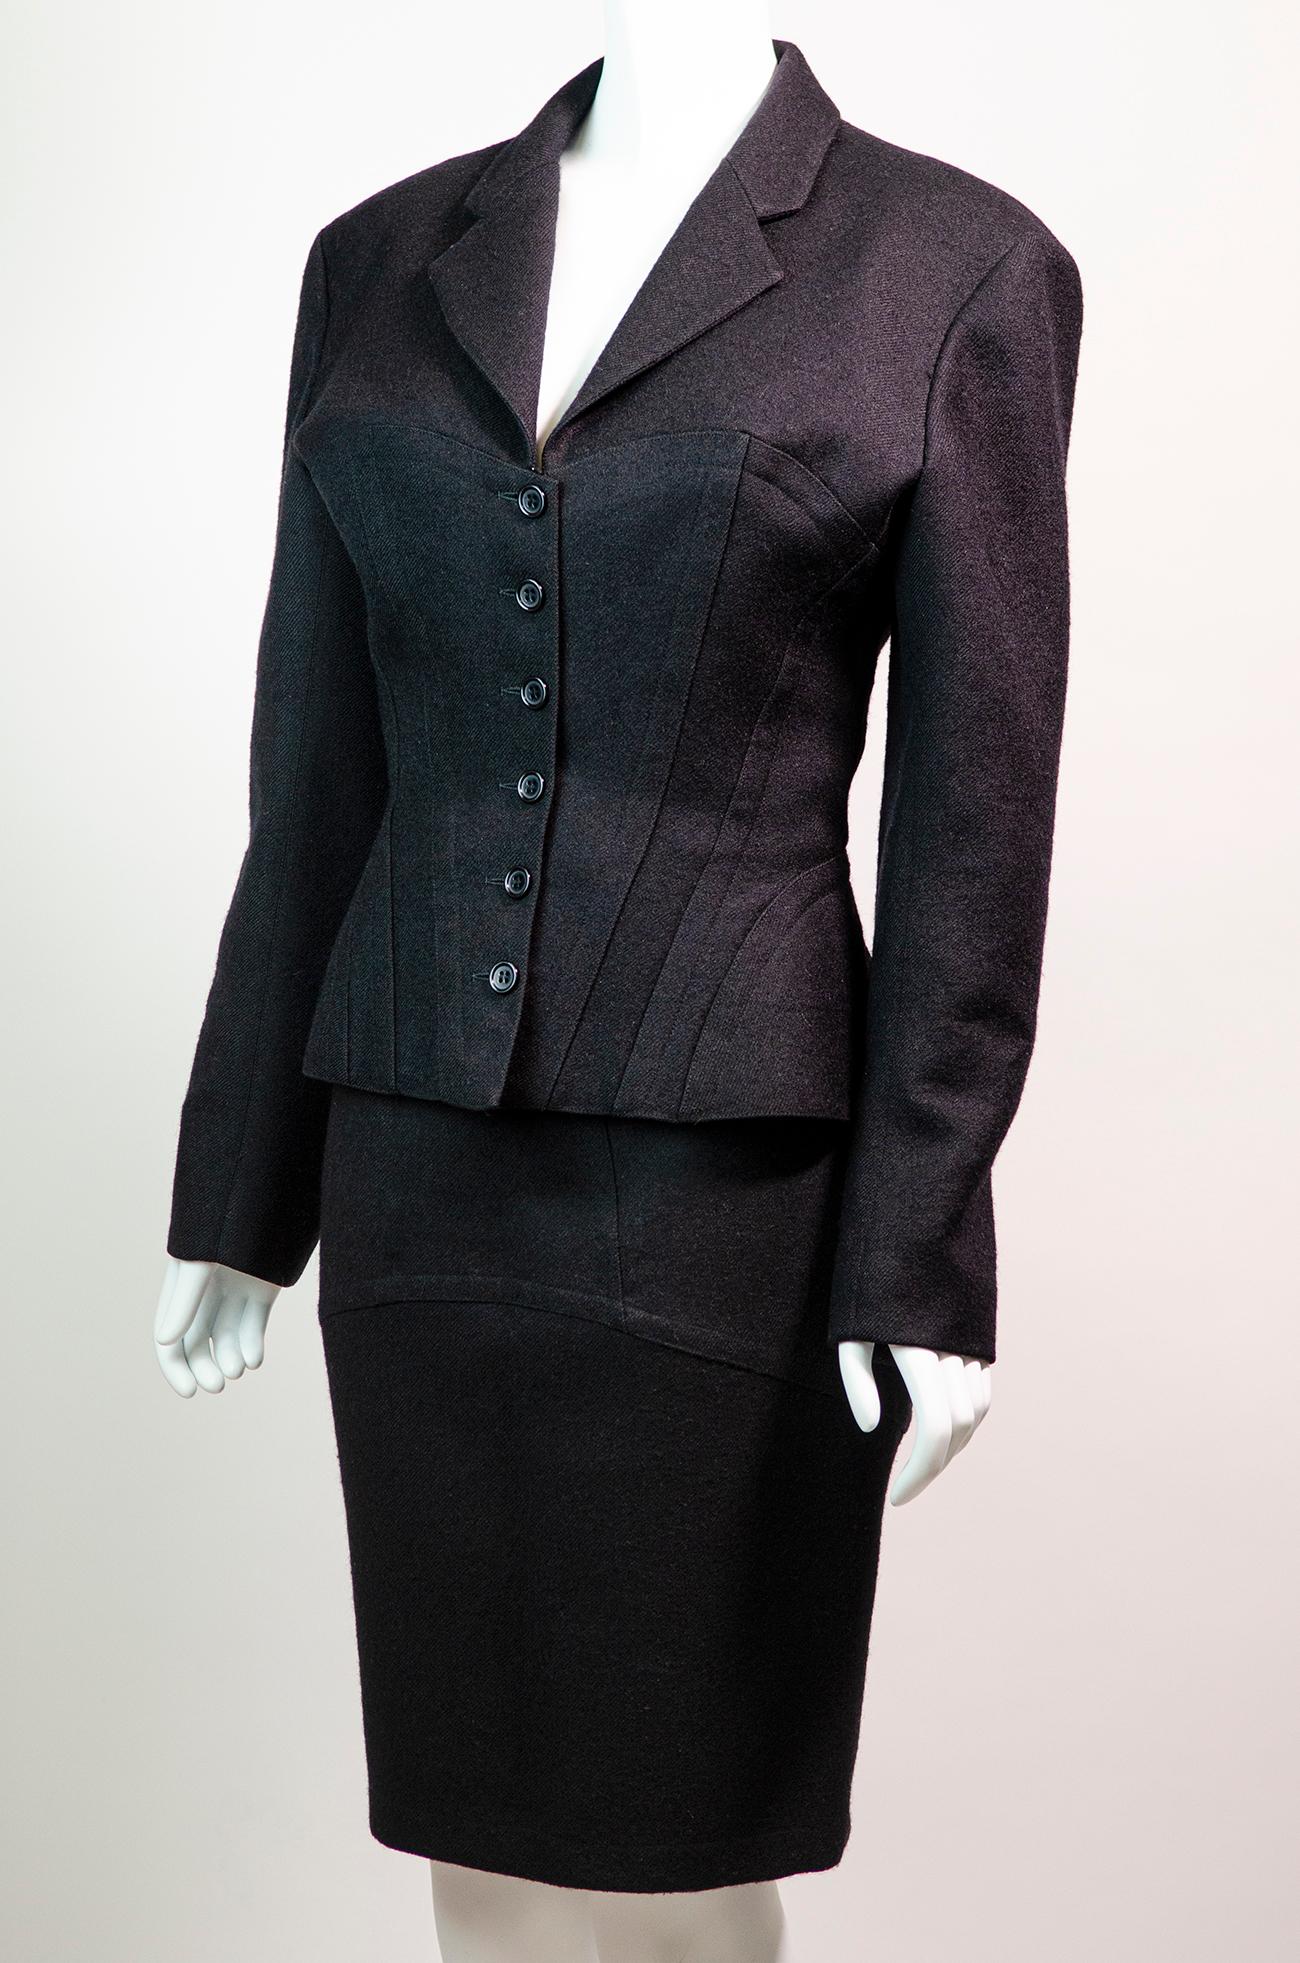 Breathtaking vintage two piece tailored suit by Azzedine Alaïa. This is from his Fall Winter 1987 runway collection. This timeless vintage suit is tailored to perfection in classic Alaïa style and features the most incredible details, outstanding